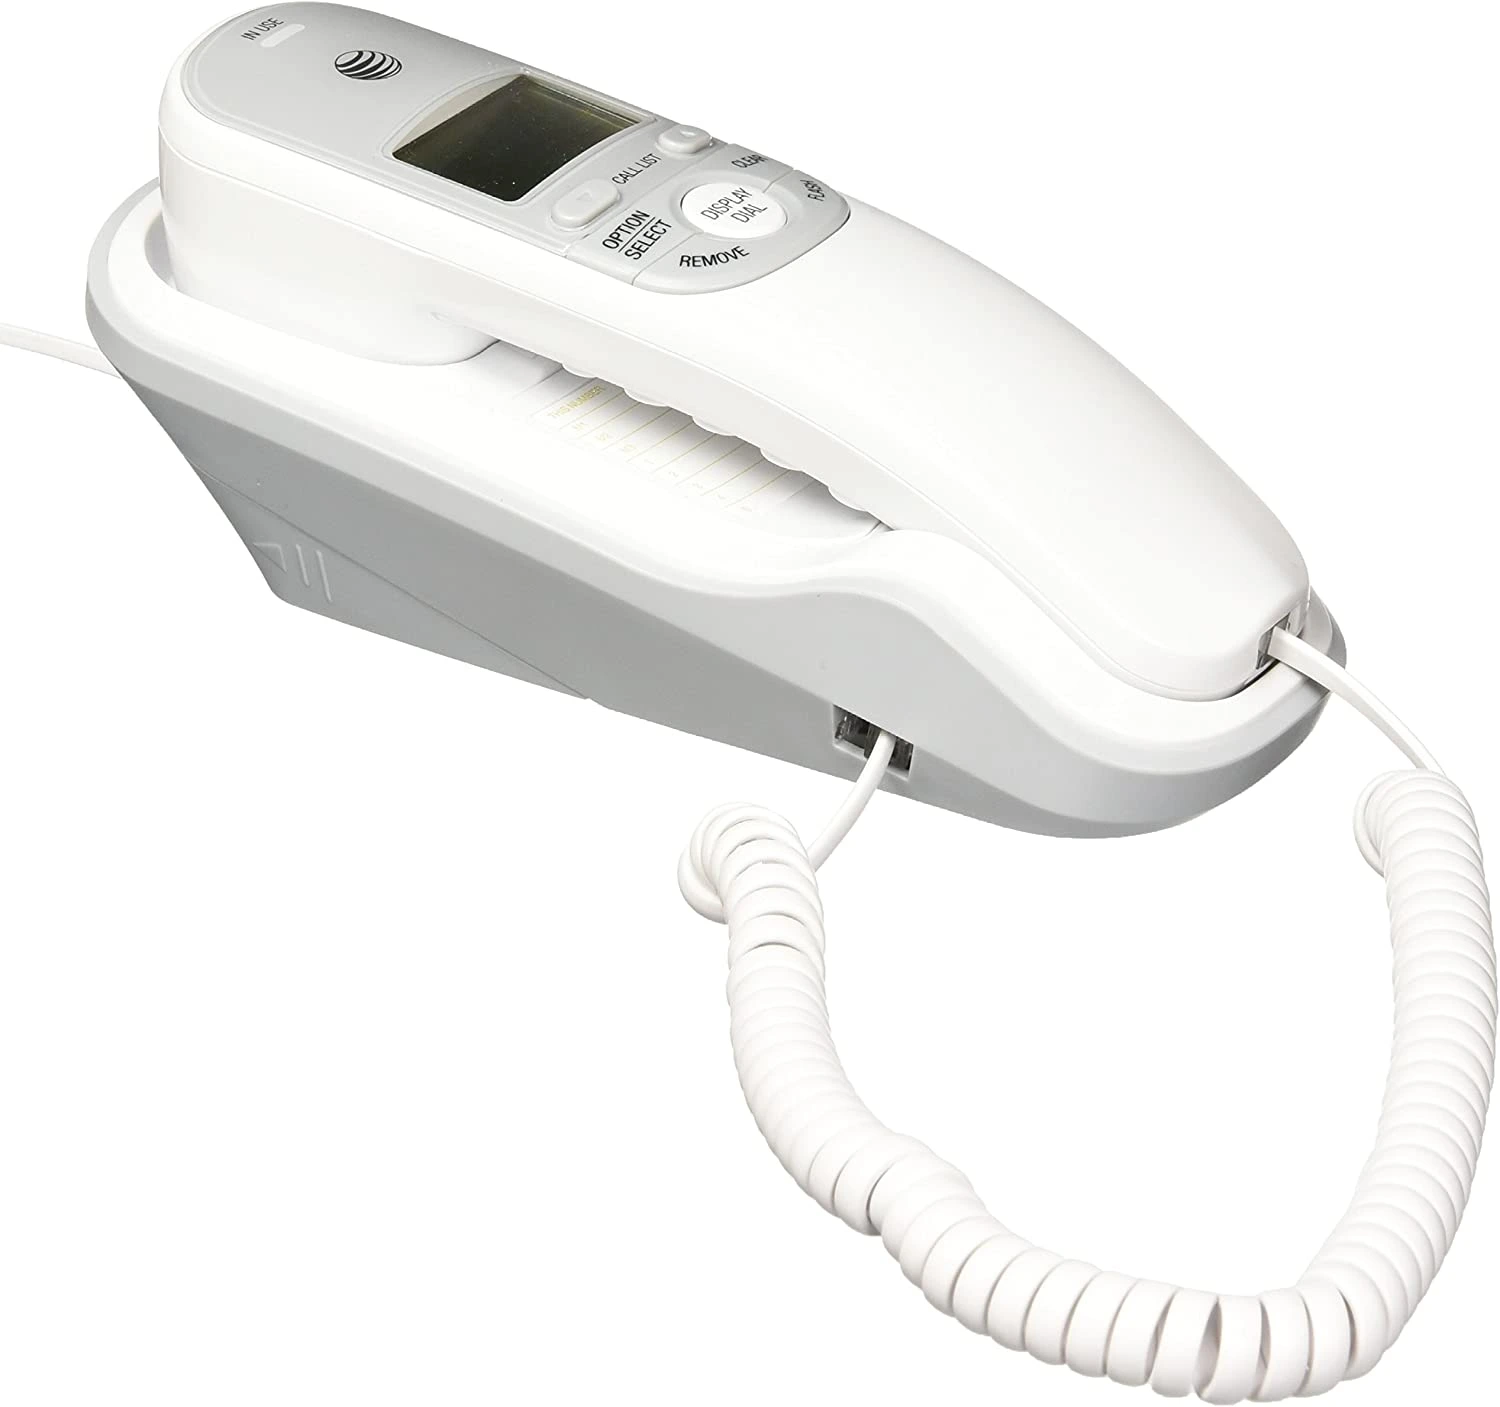 AT&T TR1909 Trimline Corded Phone with Caller ID